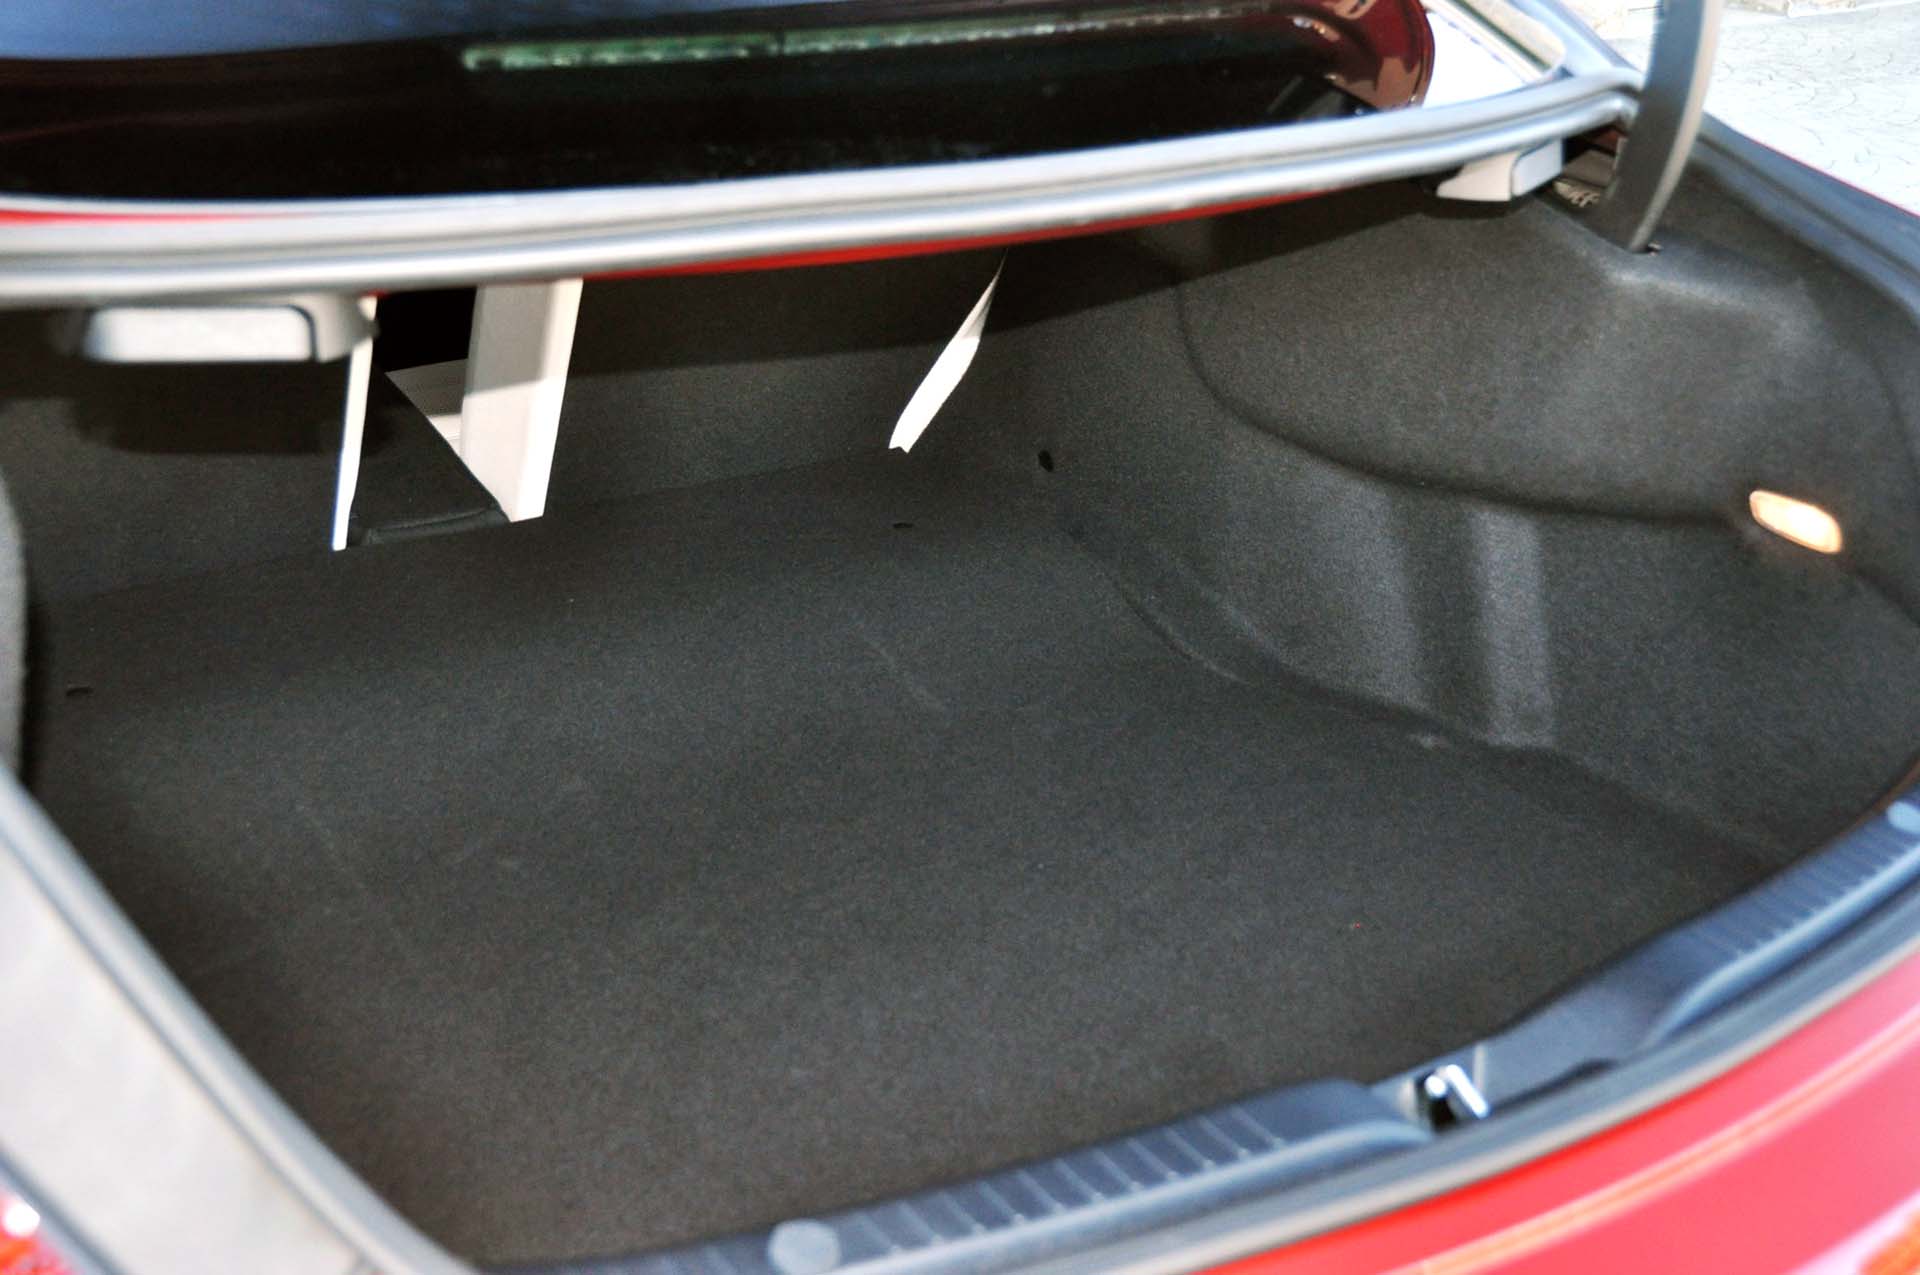 Surprisingly, there's a large, useful trunk. The rear seats are split-folding, so this is actually a car that you can travel in. Lots of room for luggage, in other words.